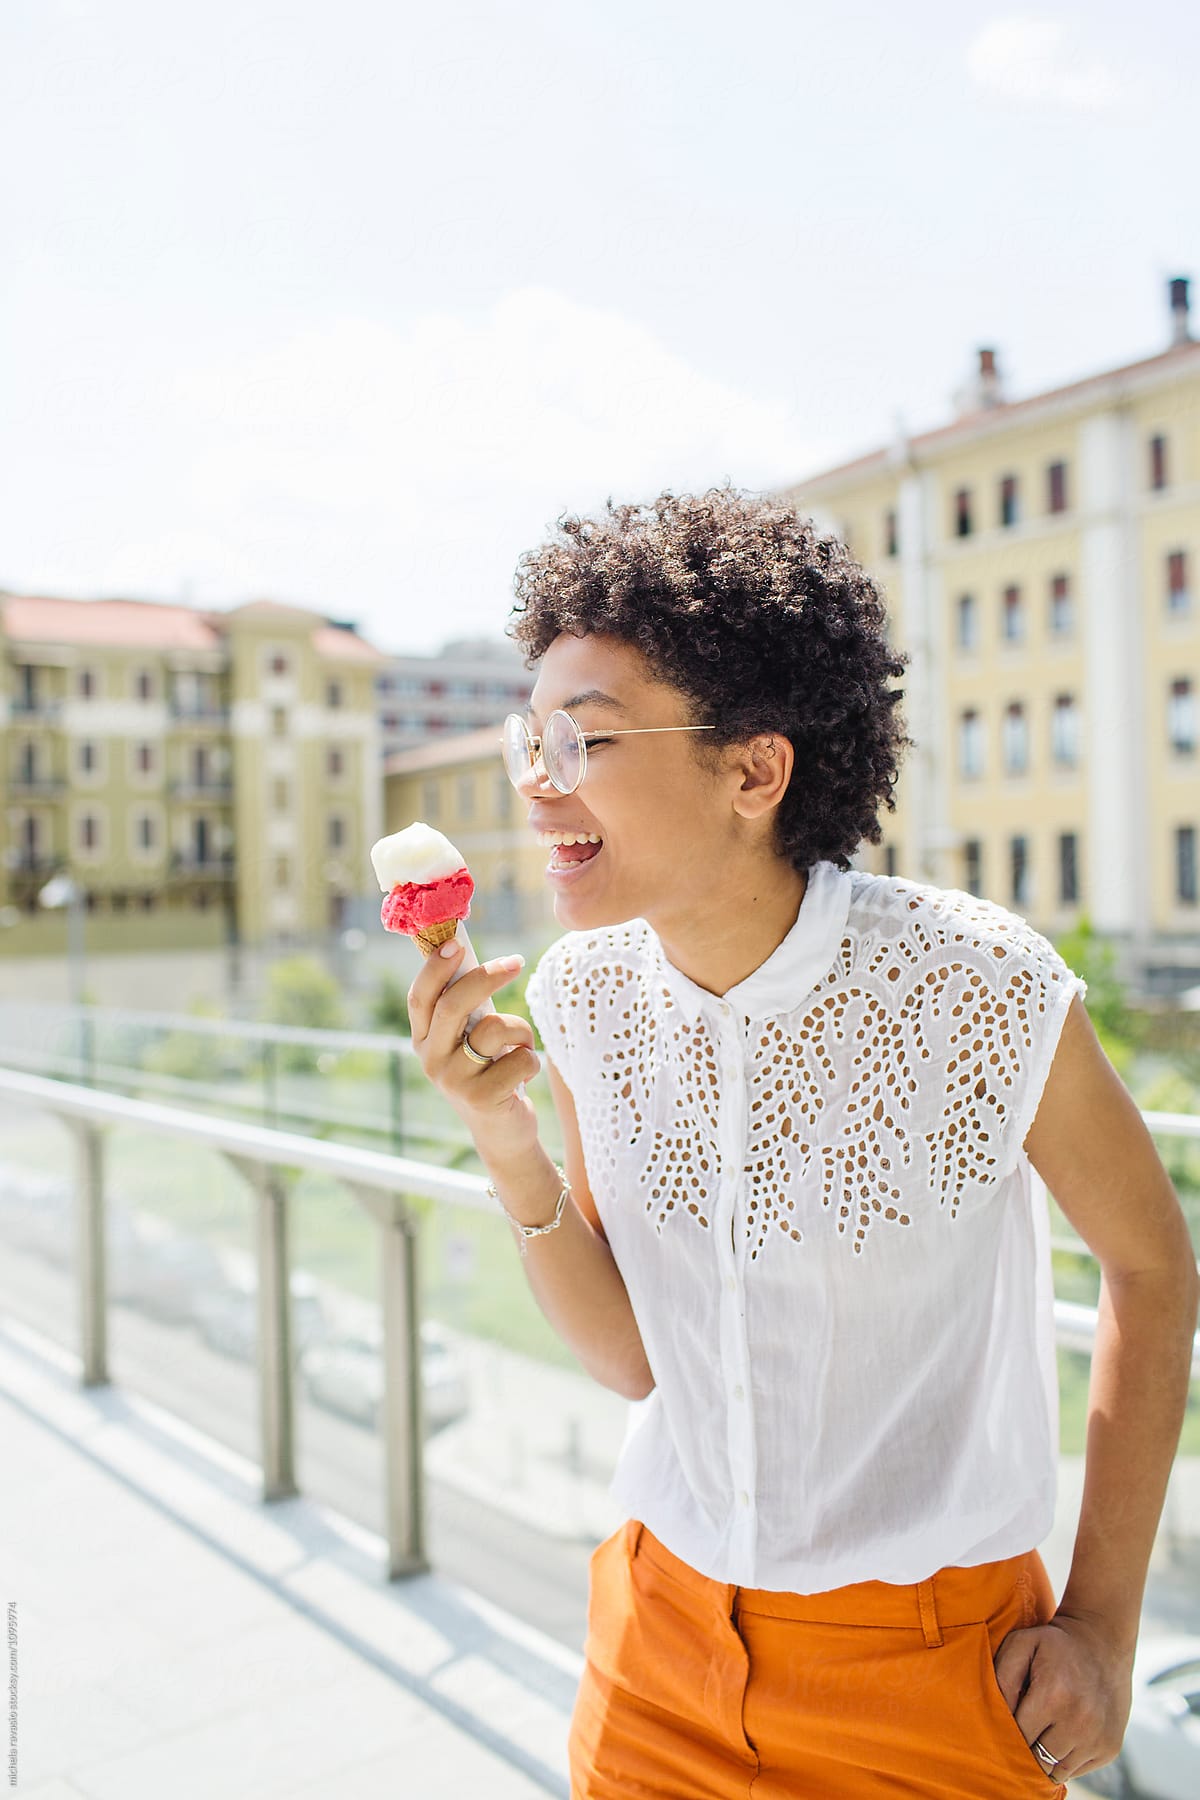 Girl eating an ice cream in a sunny day